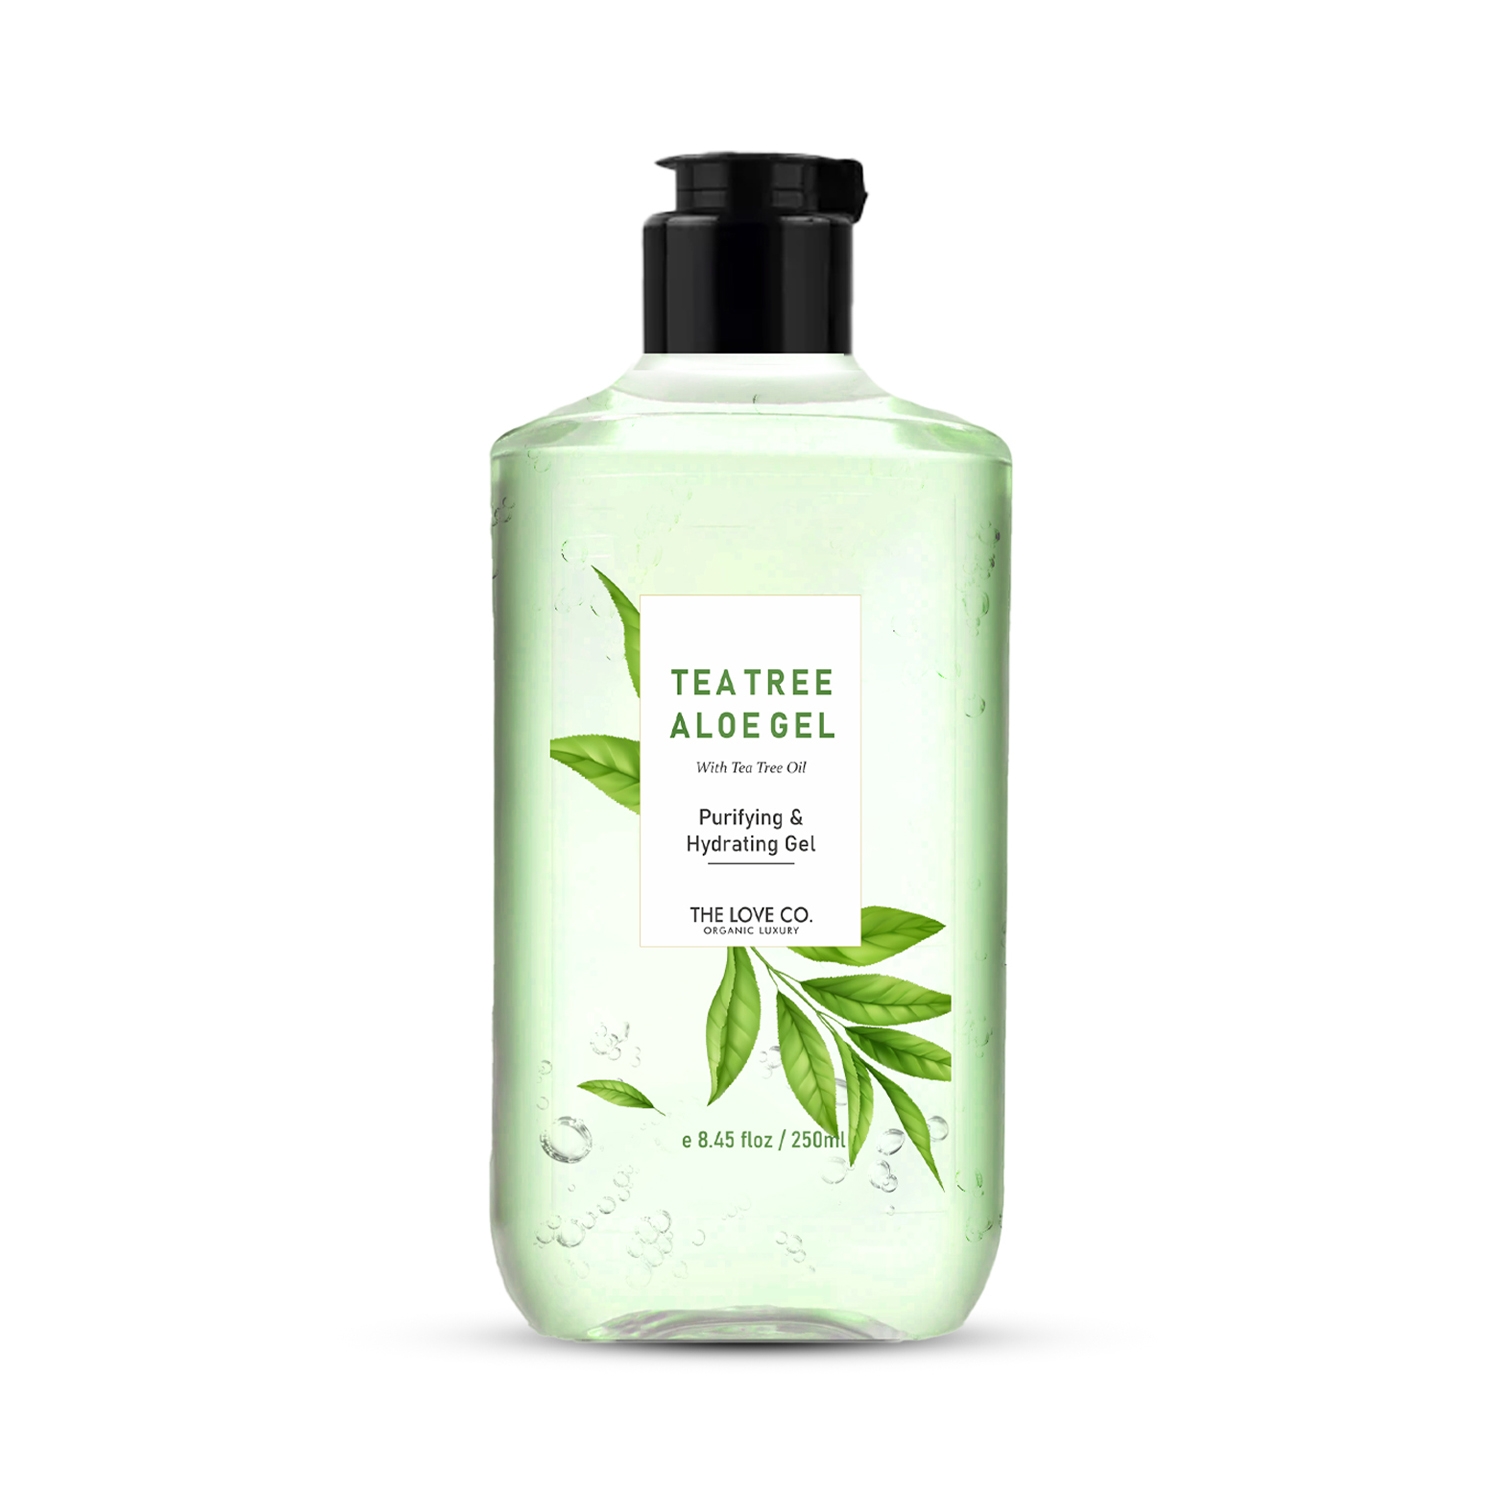 THE LOVE CO. | THE LOVE CO. Tea Tree Aloe Gel Natural Soothing And Hydrating Solution (250ml)